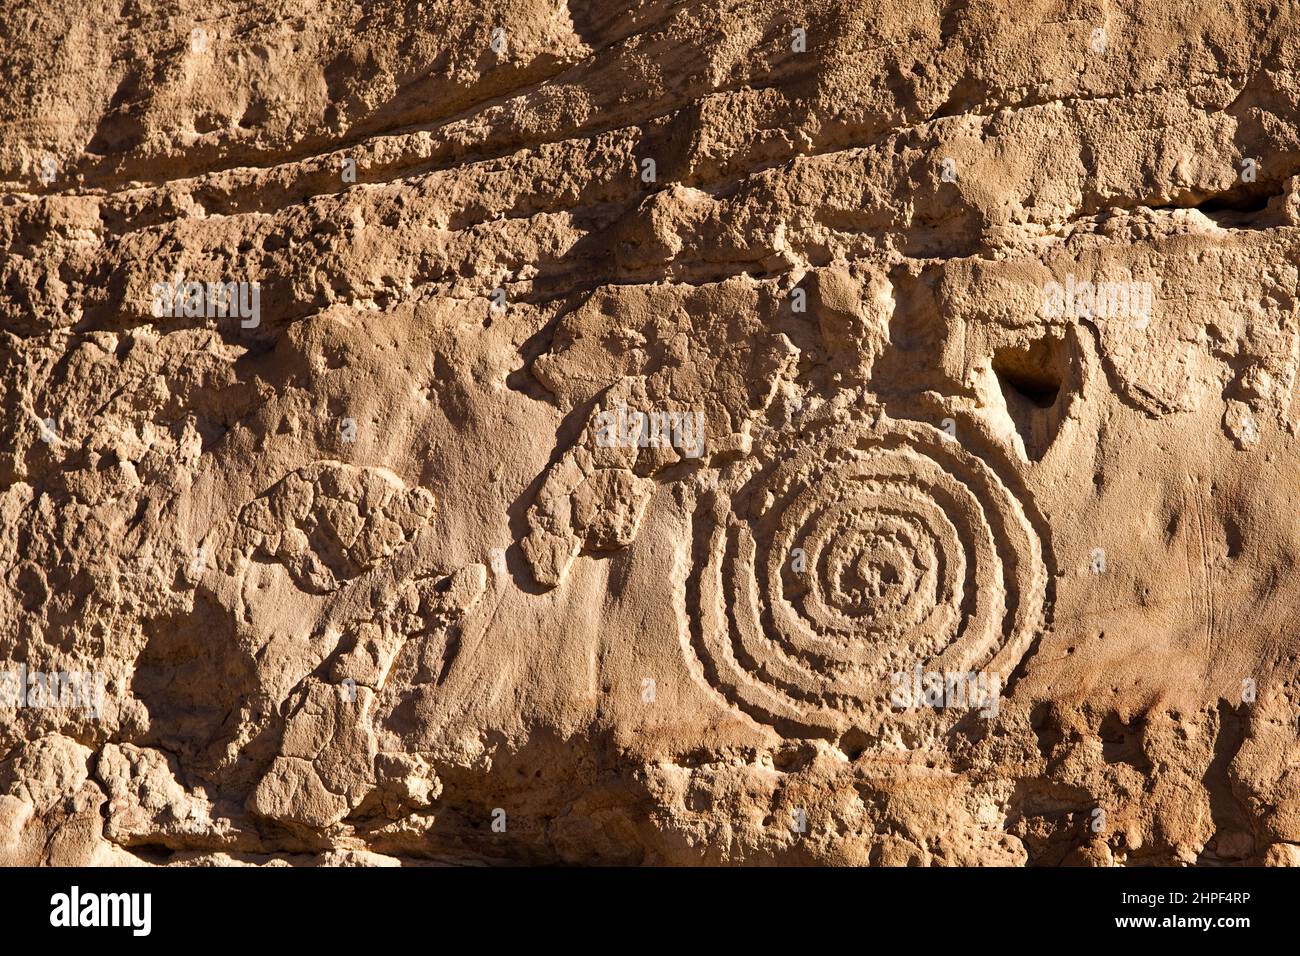 An ancient Ancestral Puebloan petroglyph rock art panel in the Chaco Culture National Historical Park in New Mexico. Stock Photo